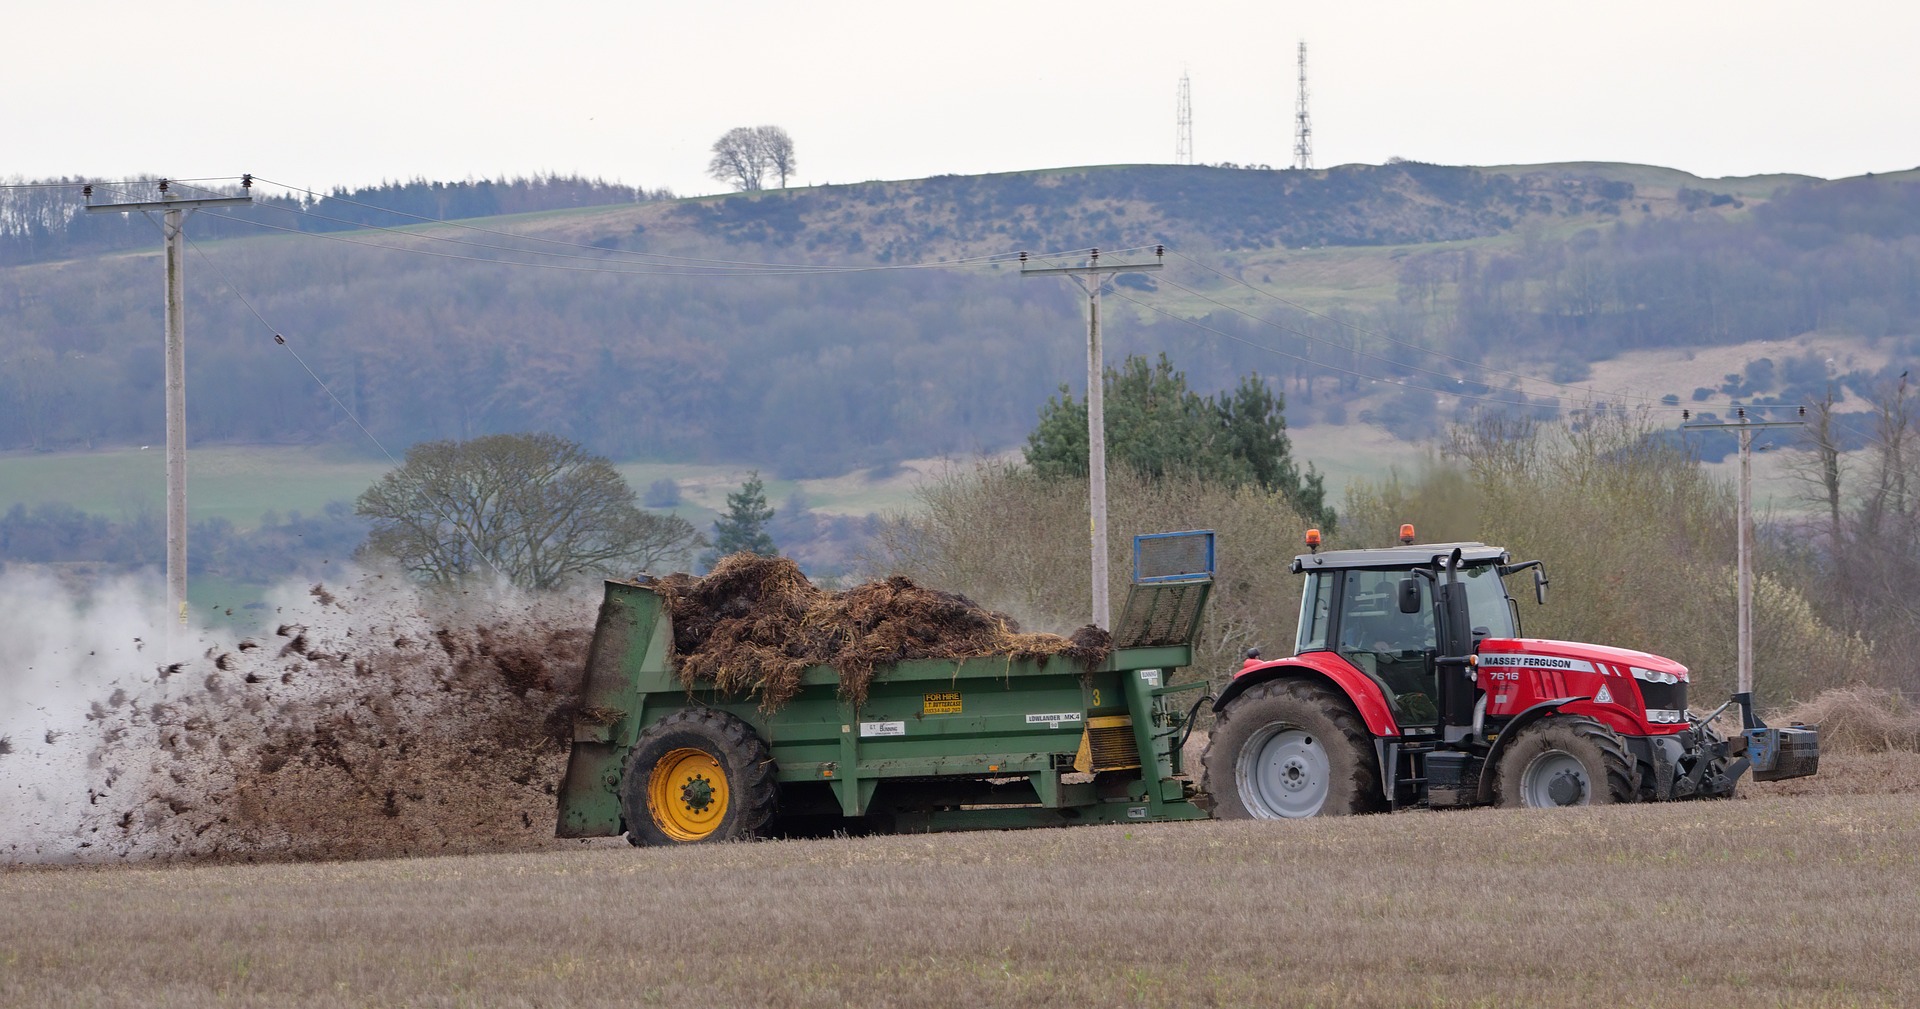 Spreading muck from a tractor into the field